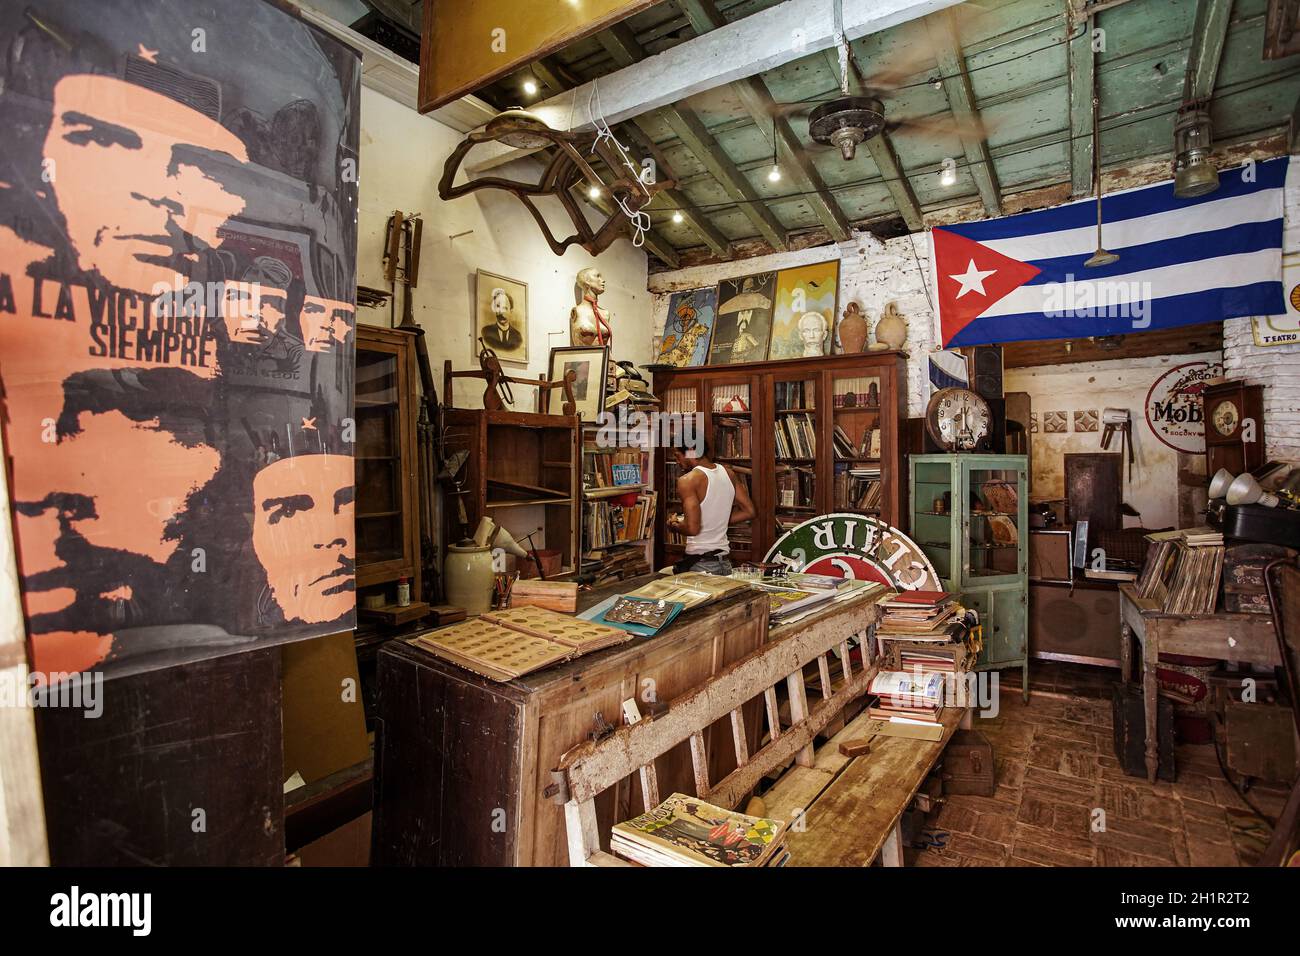 Remedios, Cuba - April 17, 2019: Photo of a Cuba antiquities collector's place in Remedios Stock Photo